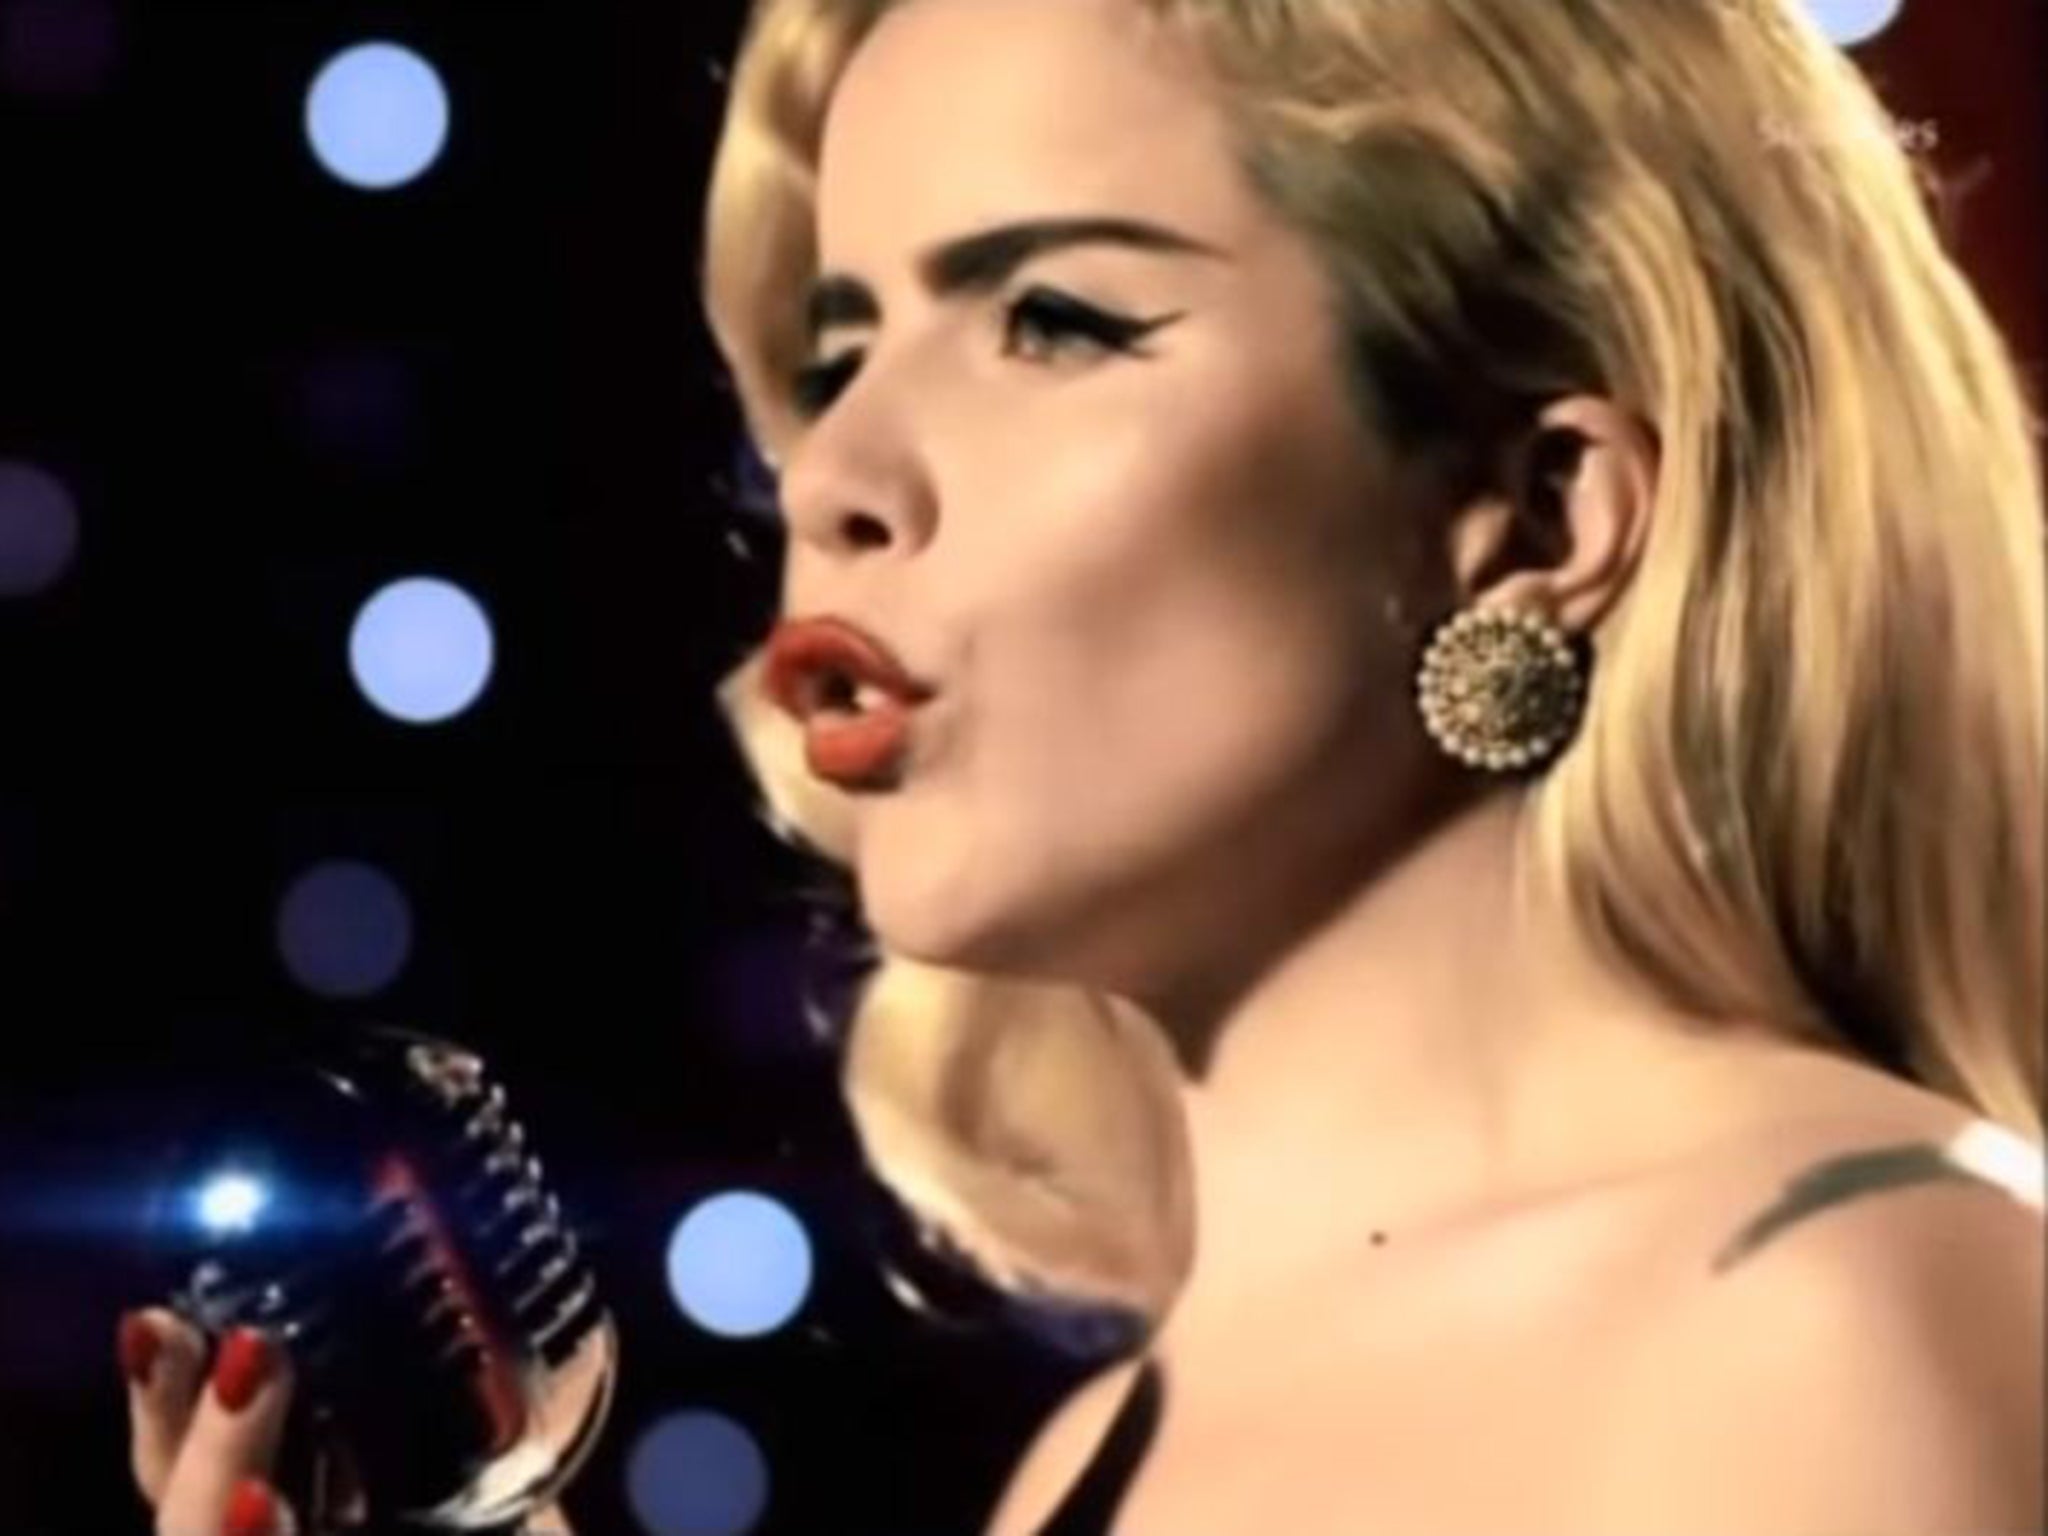 Paloma Faith was heavily criticised when her cover of World In Union debuted on ITV during the Rugby World Cup